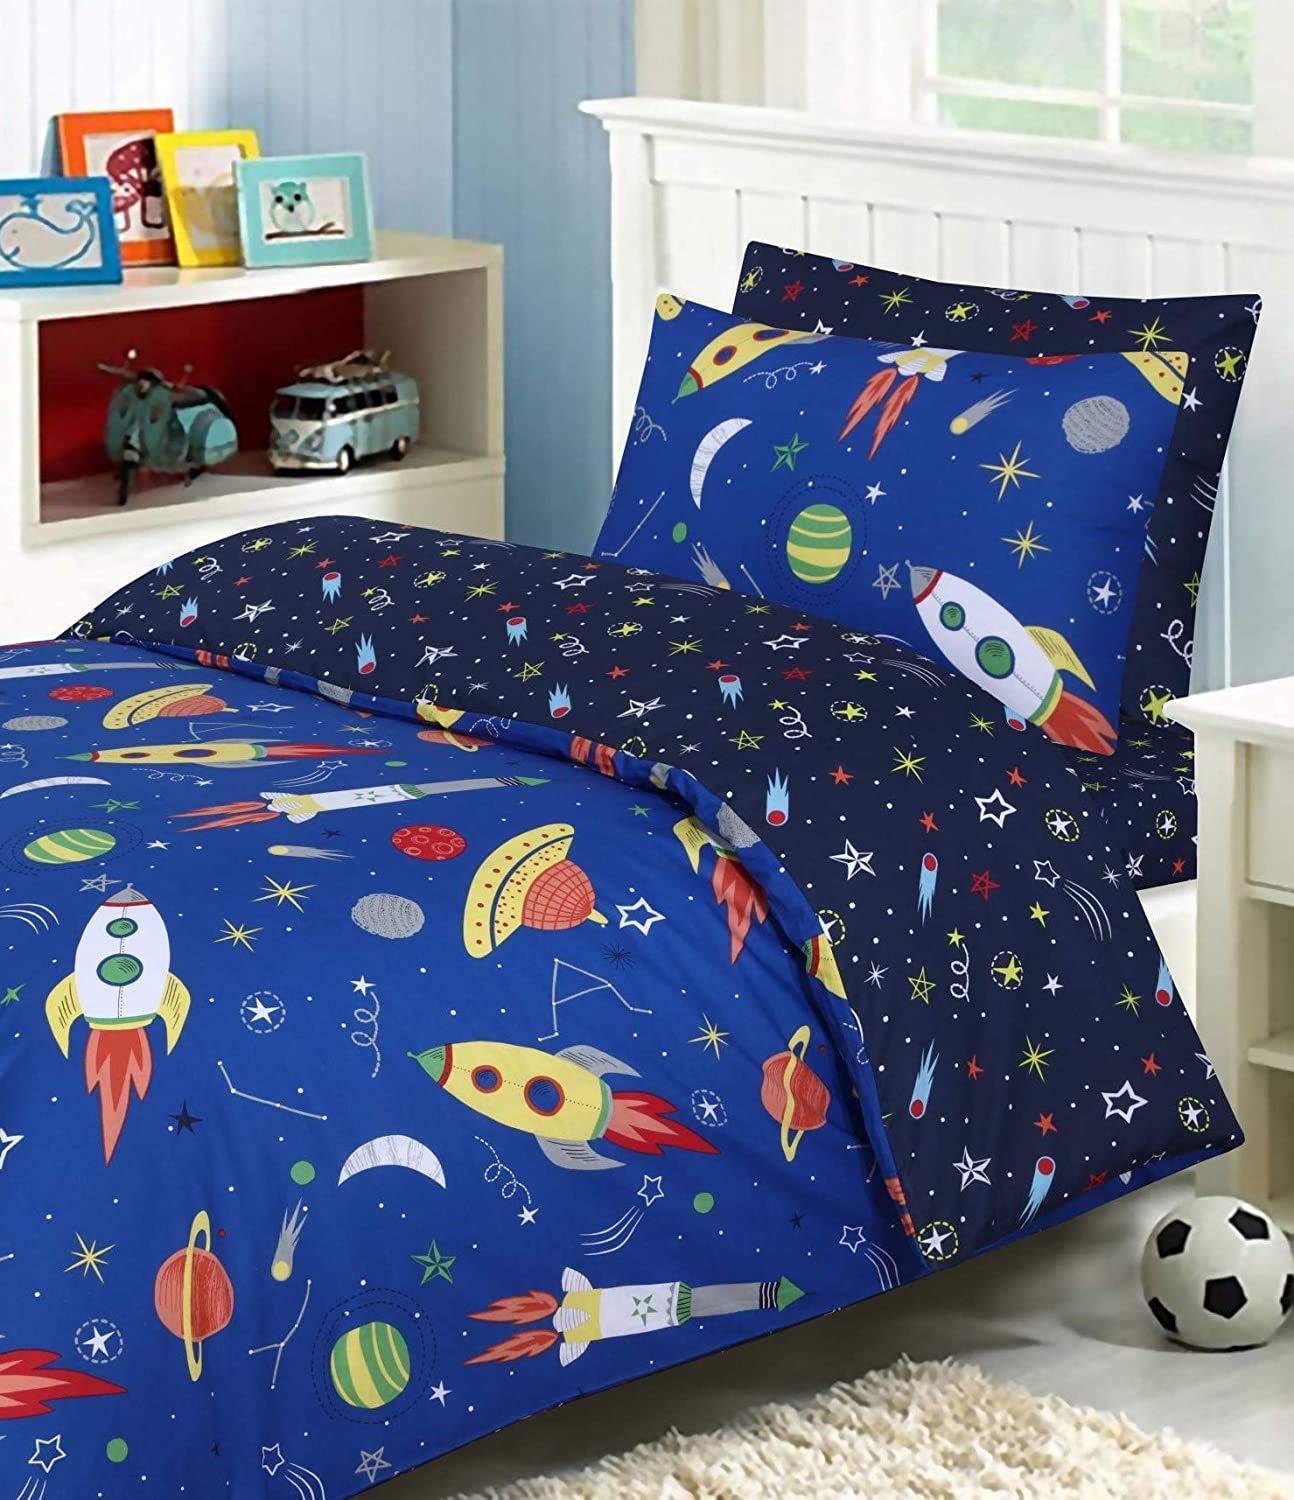 Indus Textiles Boys Childrens Kids Complete Duvet Cover Sets - Fitted Sheet and Pillowcases Matching - 100% Soft Cotton - Reversible - Space Blue - Single Complete Set